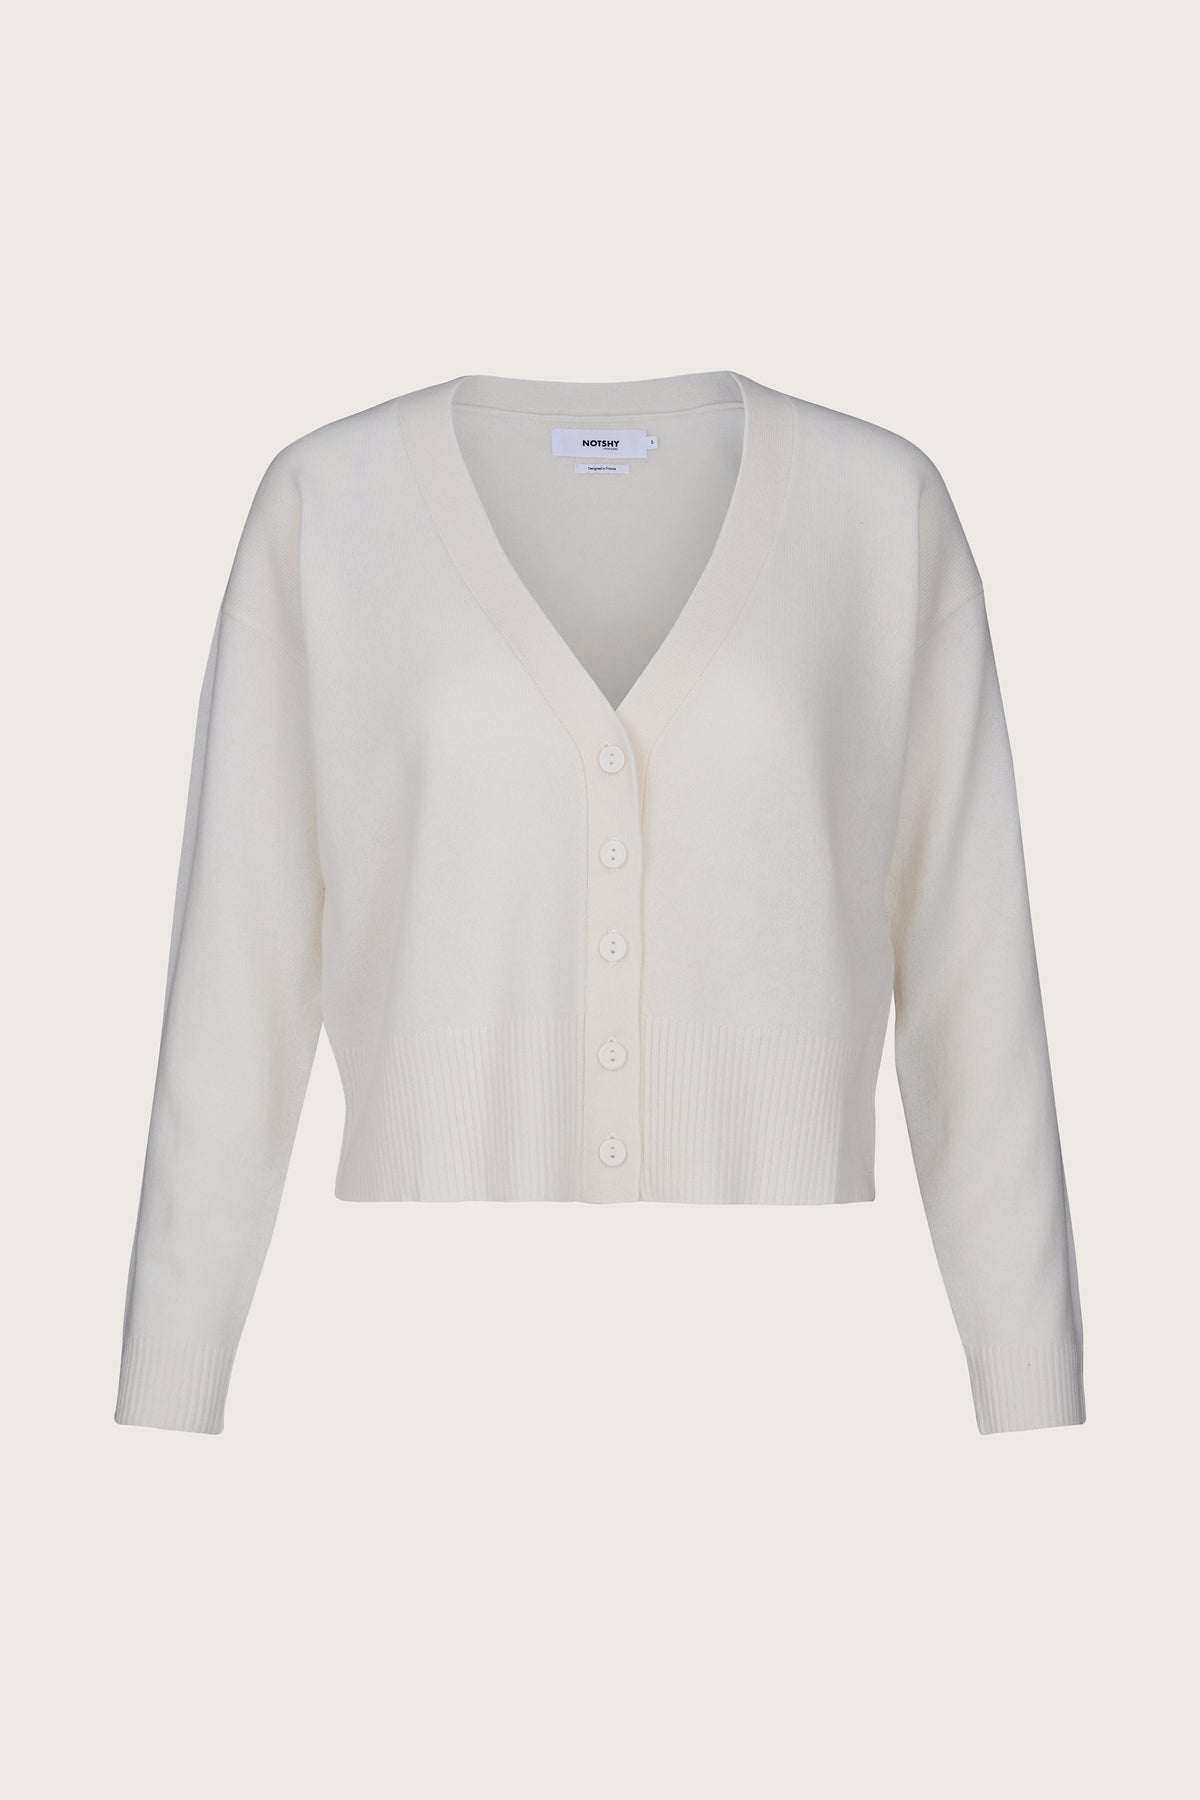 Ecru cashmere cardigan with a v neck and long sleeves